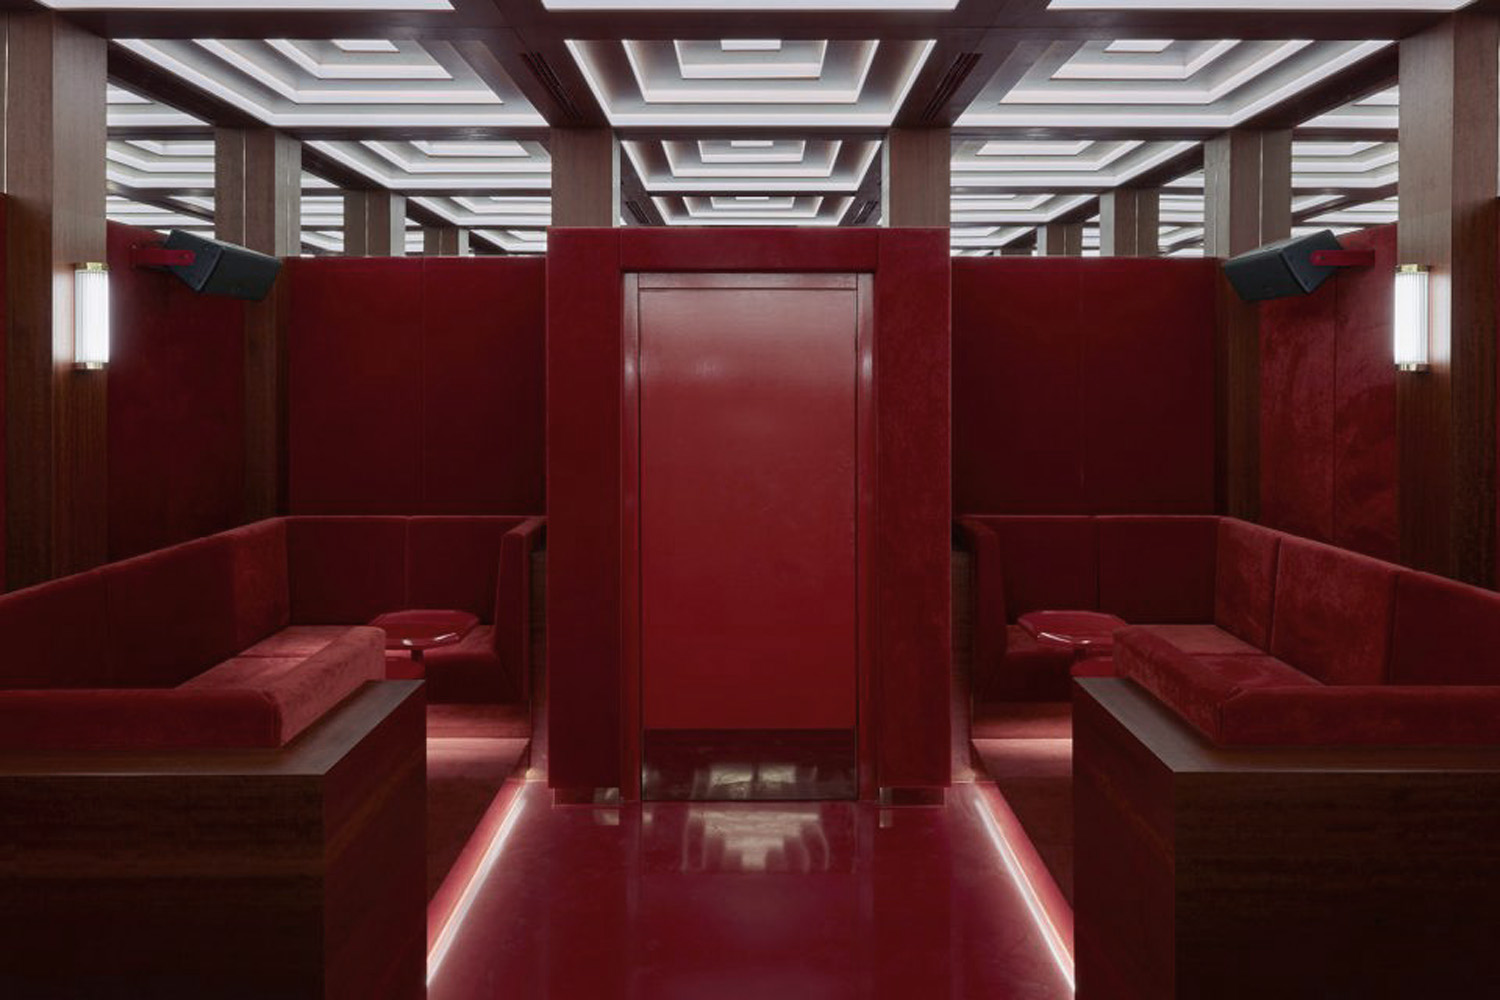 Space design of hotel whisky room